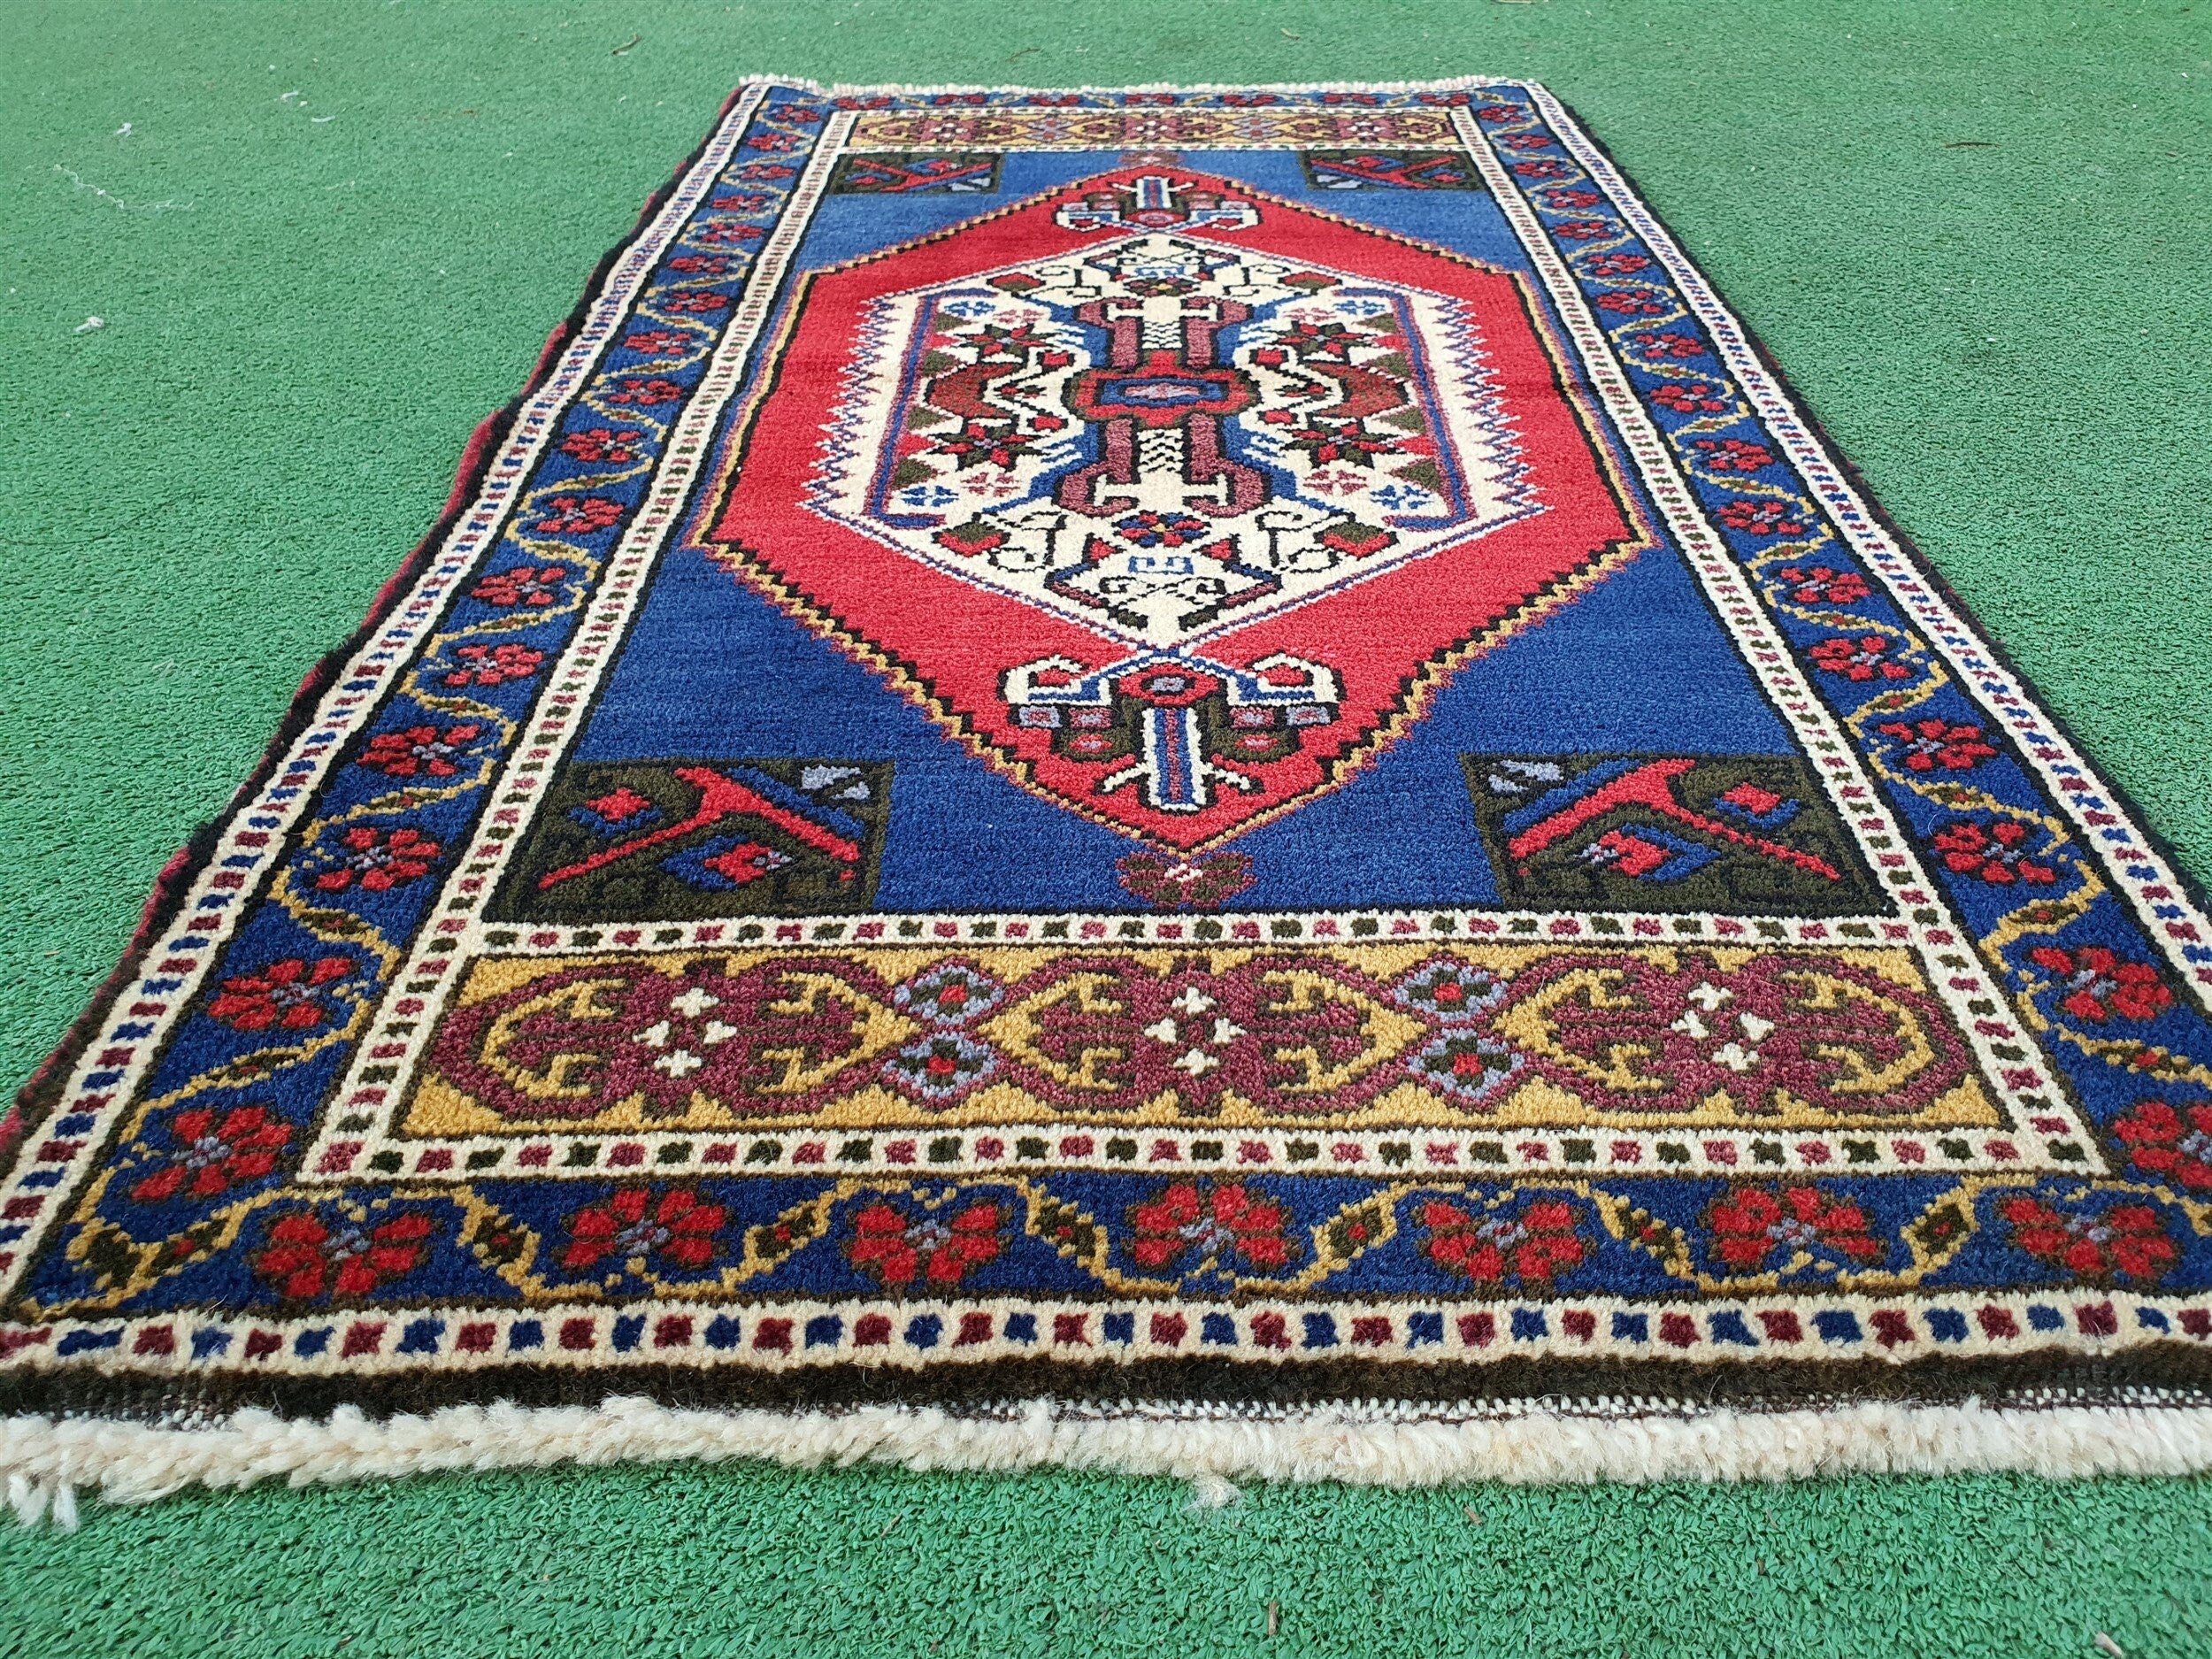 Vintage Turkish Small Rug,  3 ft 6 in  x  2 ft, Red Blue and Beige Faded Distressed Antique Style Mat